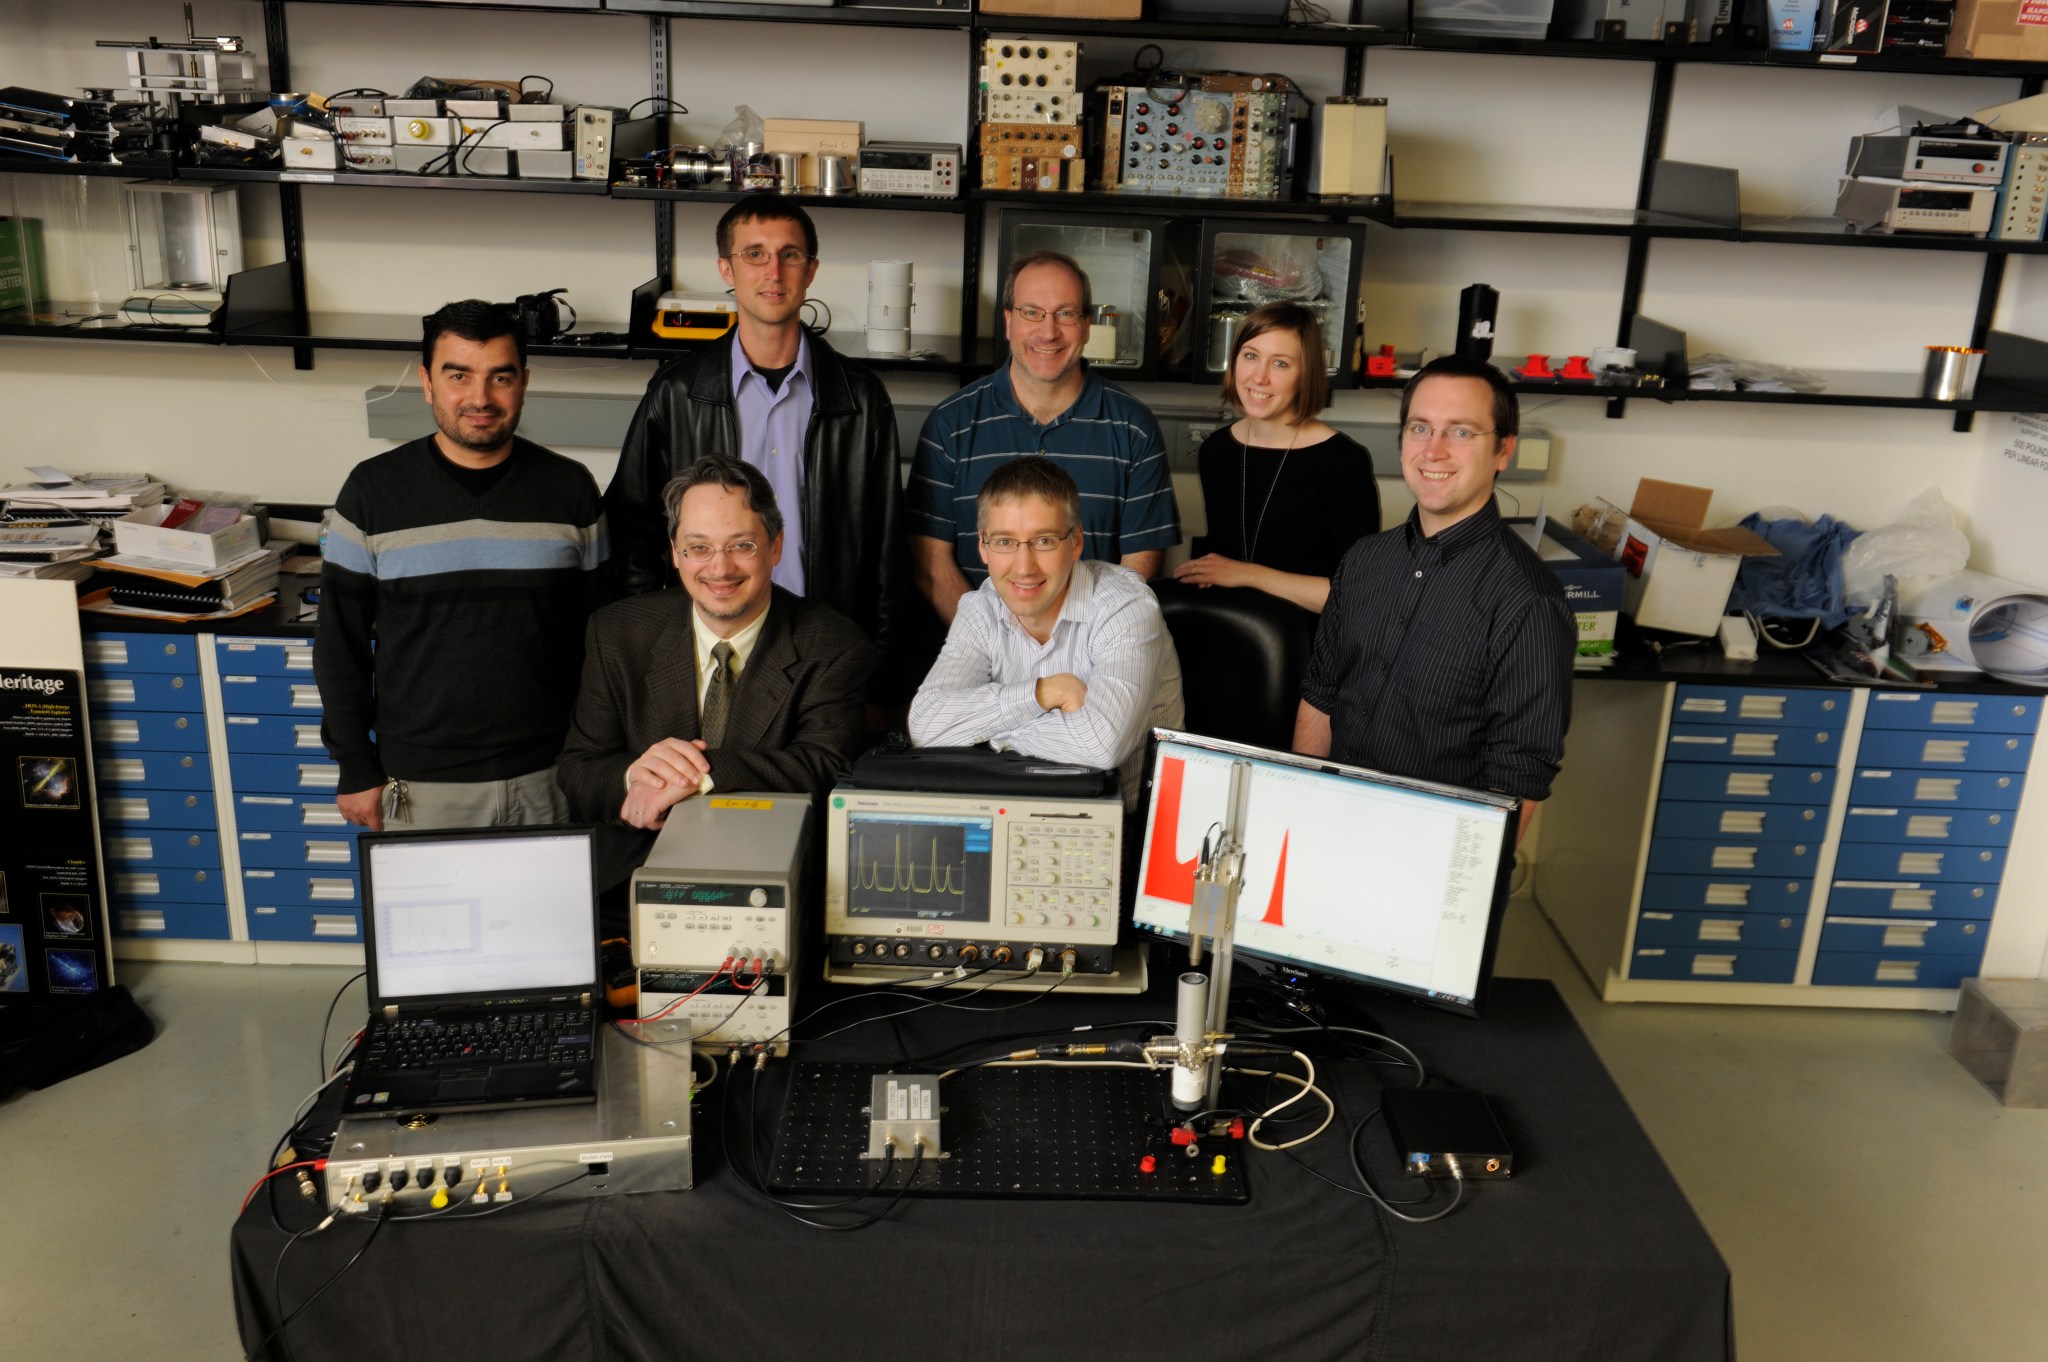 Technologists in lab pose for photo with computer displays.